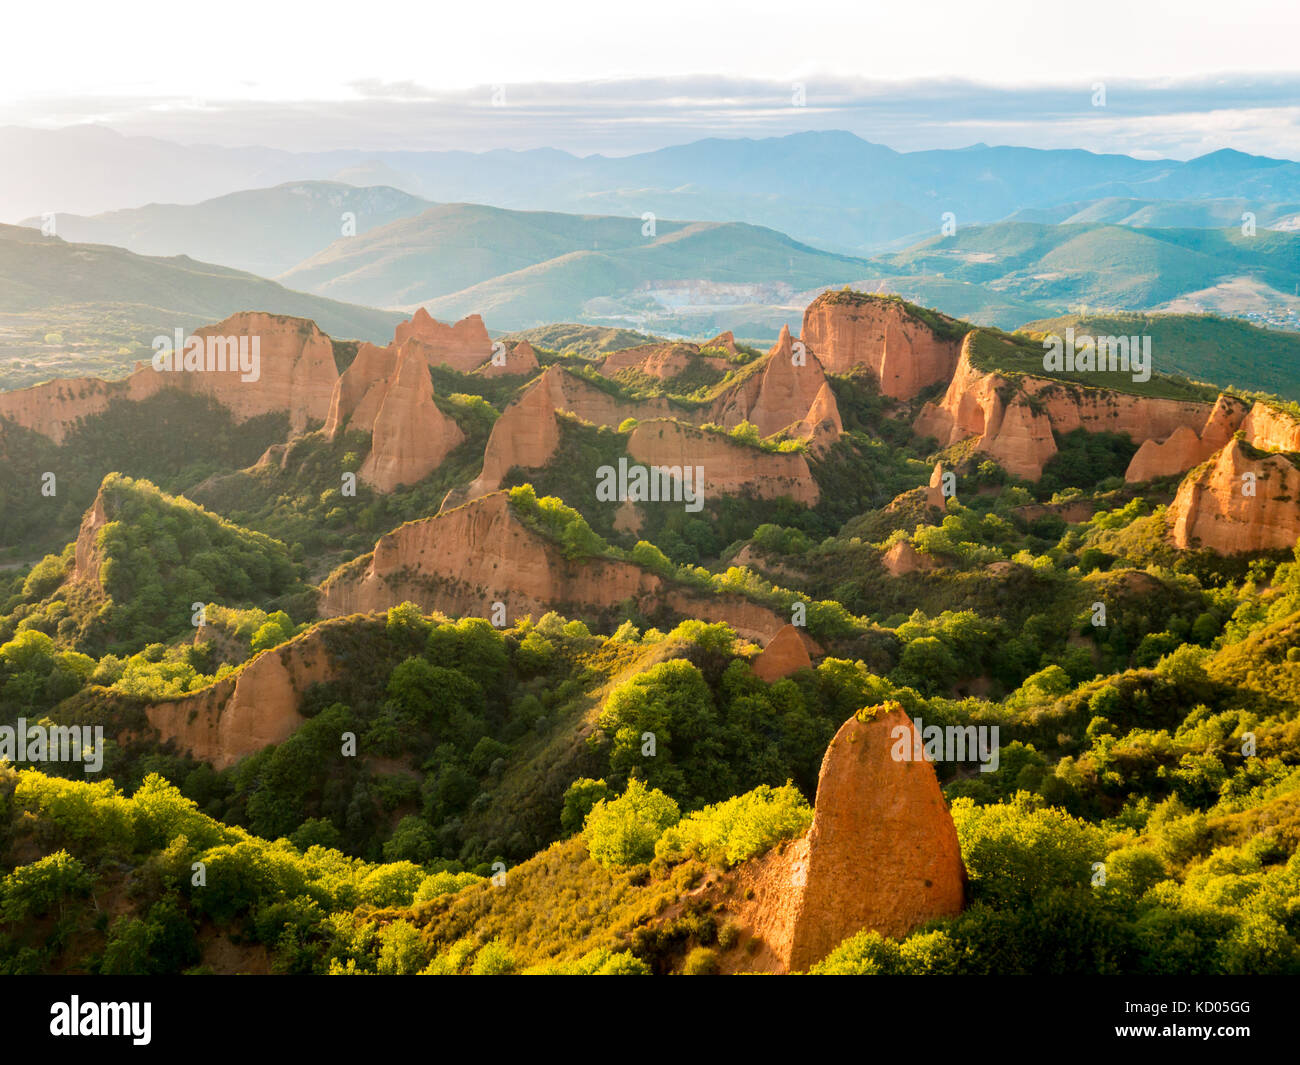 Las Medulas historic gold mining mountains near the town of Ponferrada in the province of Leon, Castile and Leon, Spain. View from Orellan viewpoint. Stock Photo